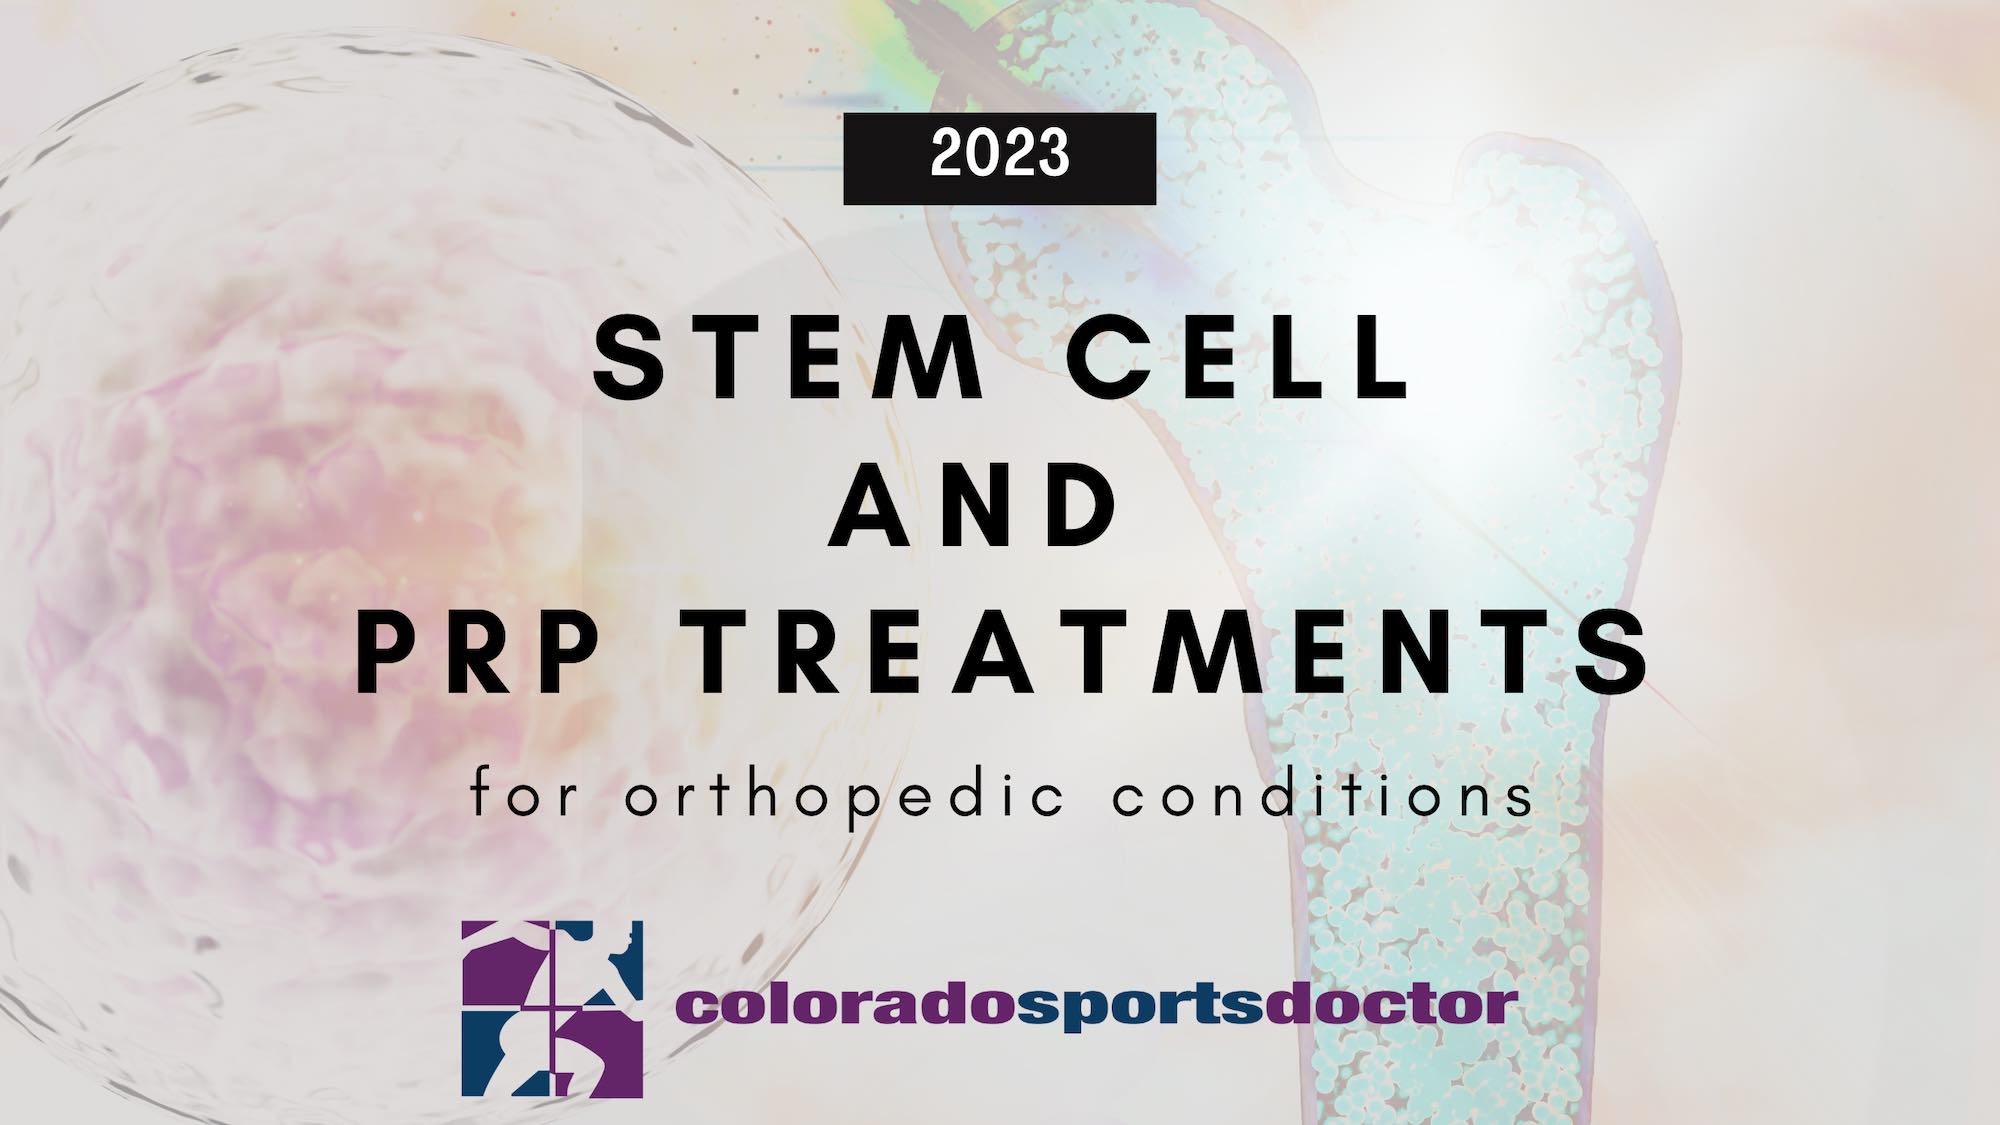 Stem Cell and Platelet Rich Plasma Treatments for Orthopedic Conditions in 2023